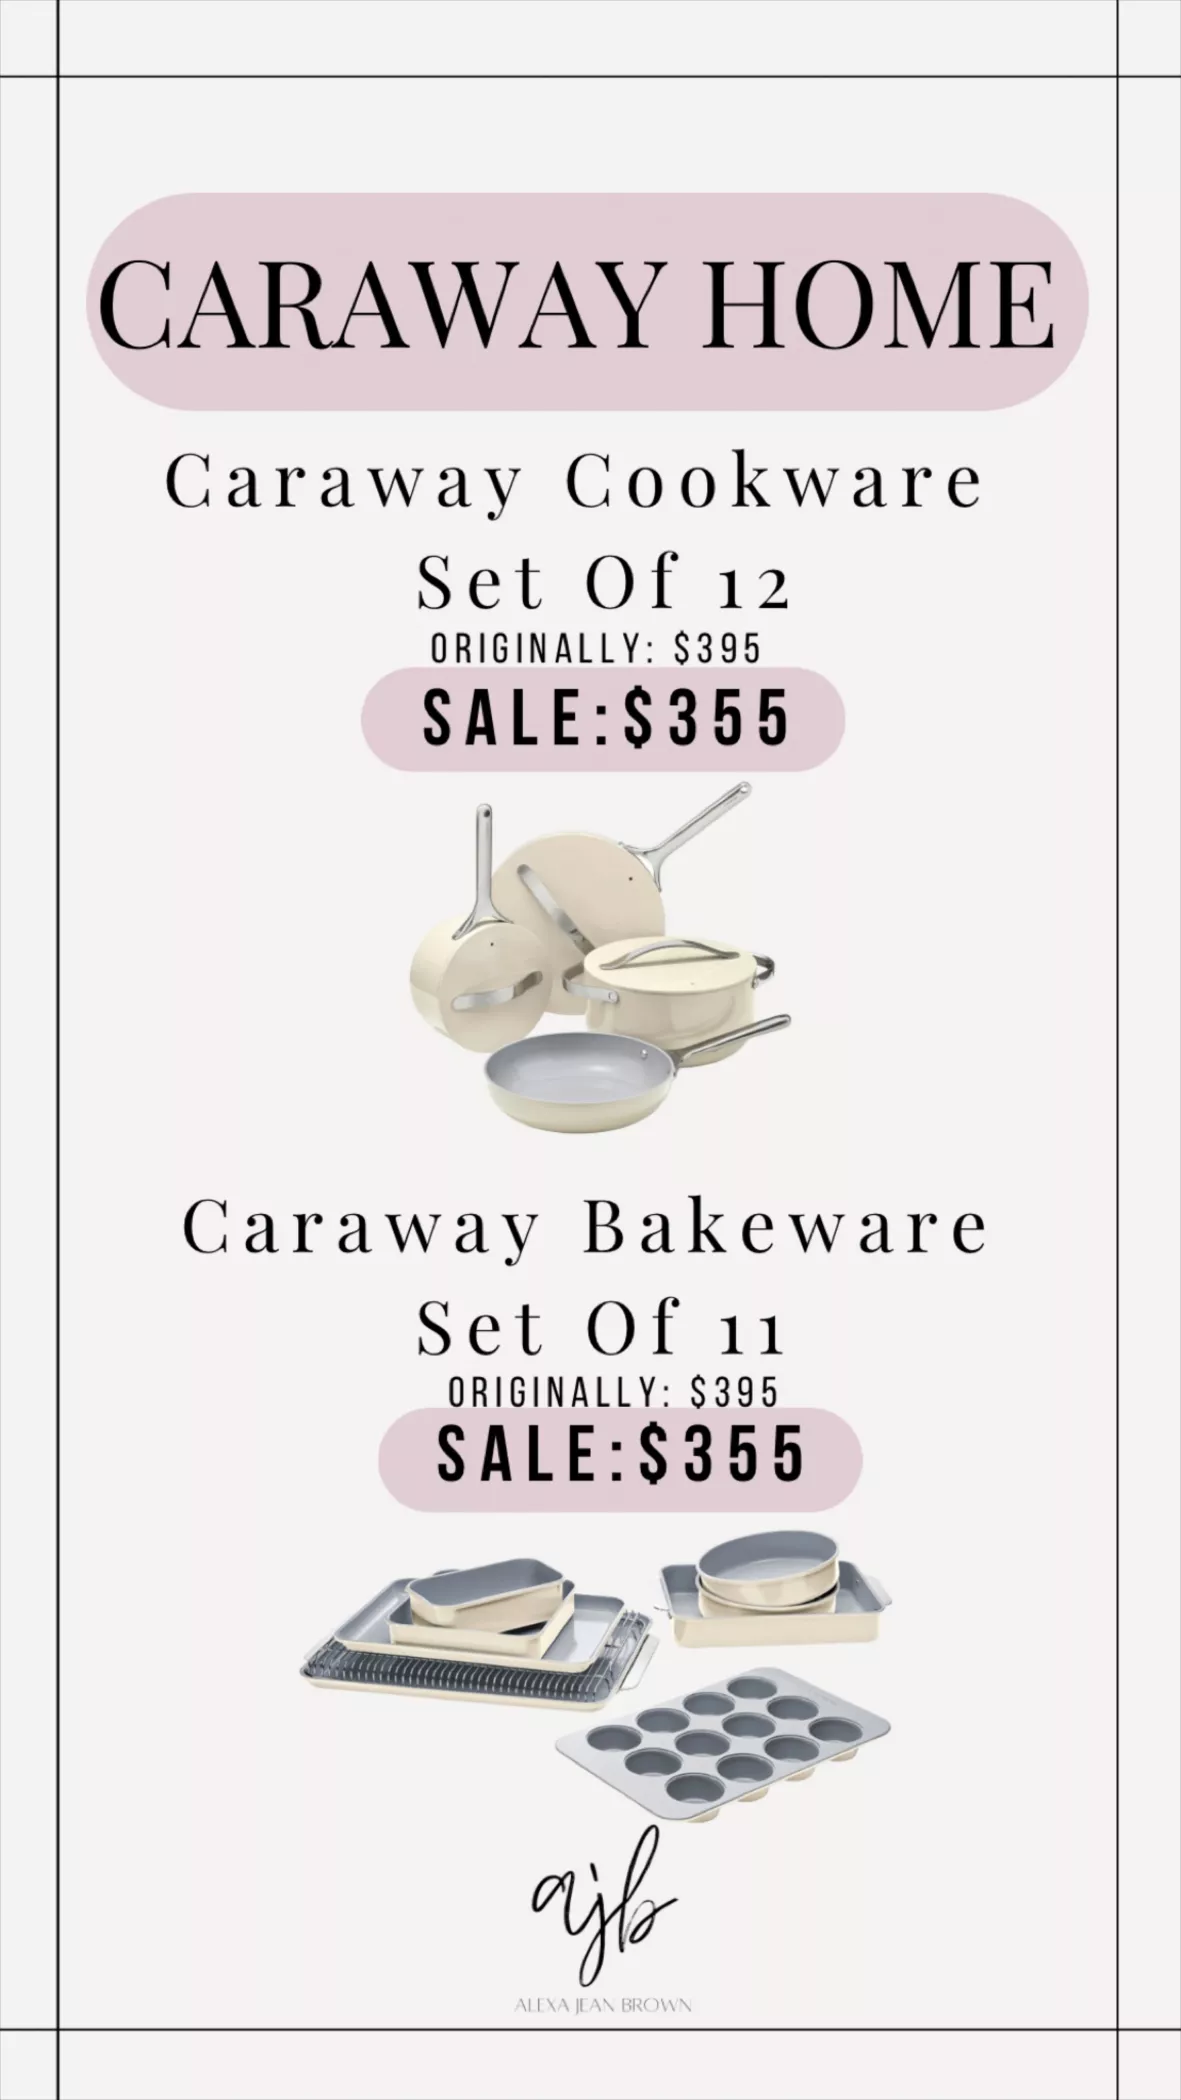 Caraway is now selling all its products at The Container Store